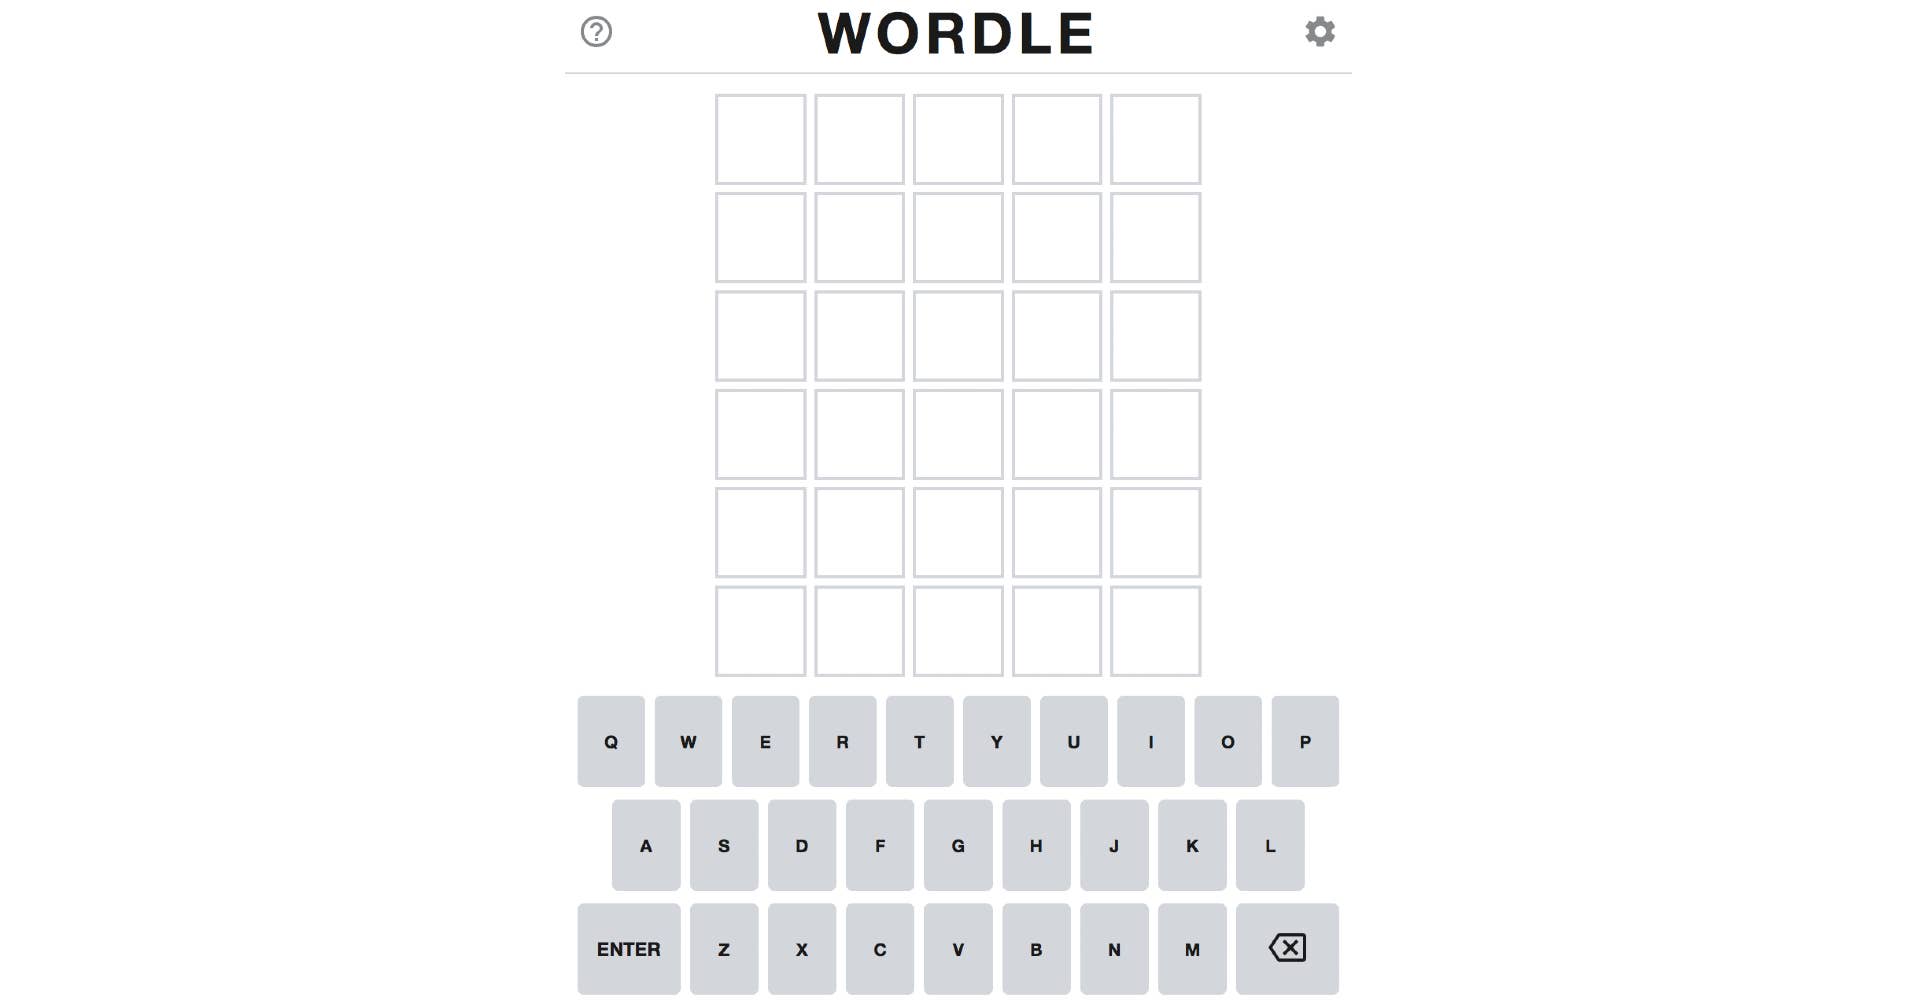 An image of the Wordle game is pictured